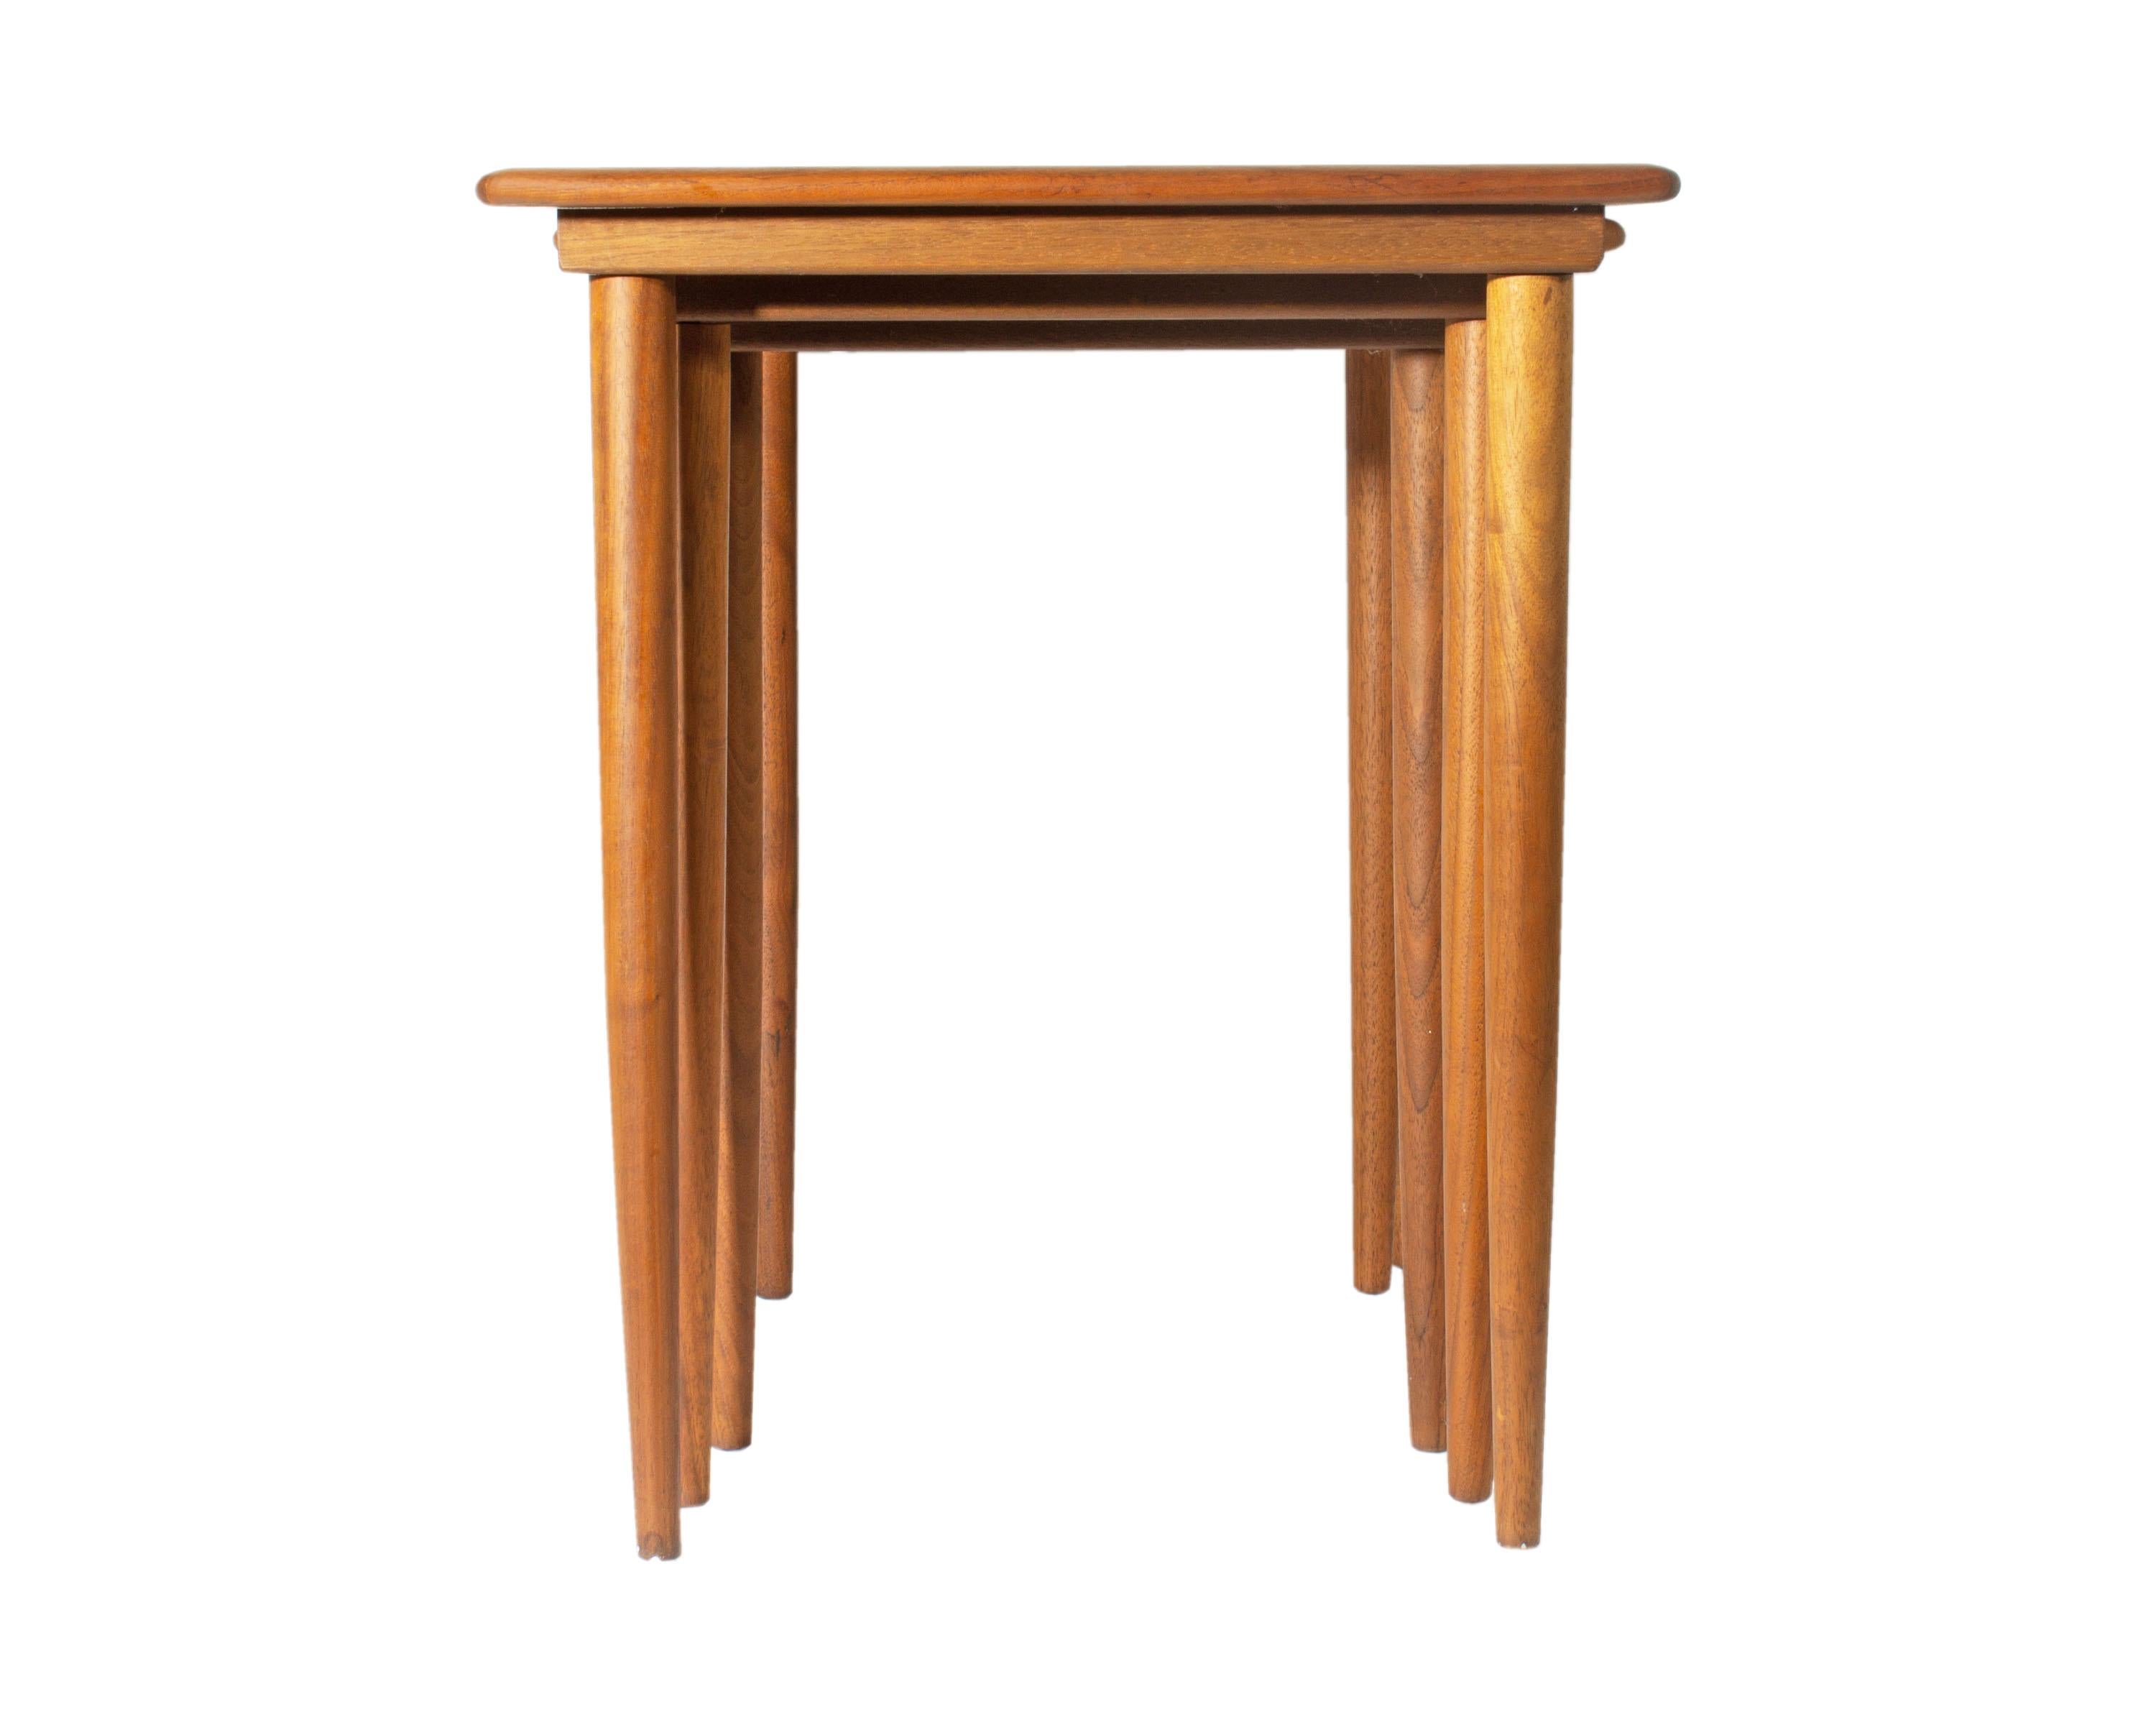 A set of rectangular Danish Modern nesting tables. Made in Denmark, these three tables feature a slim profile and are made of walnut. Each of the tables features a two-tone top and tapered legs. The table slides into a groove which secures it to the